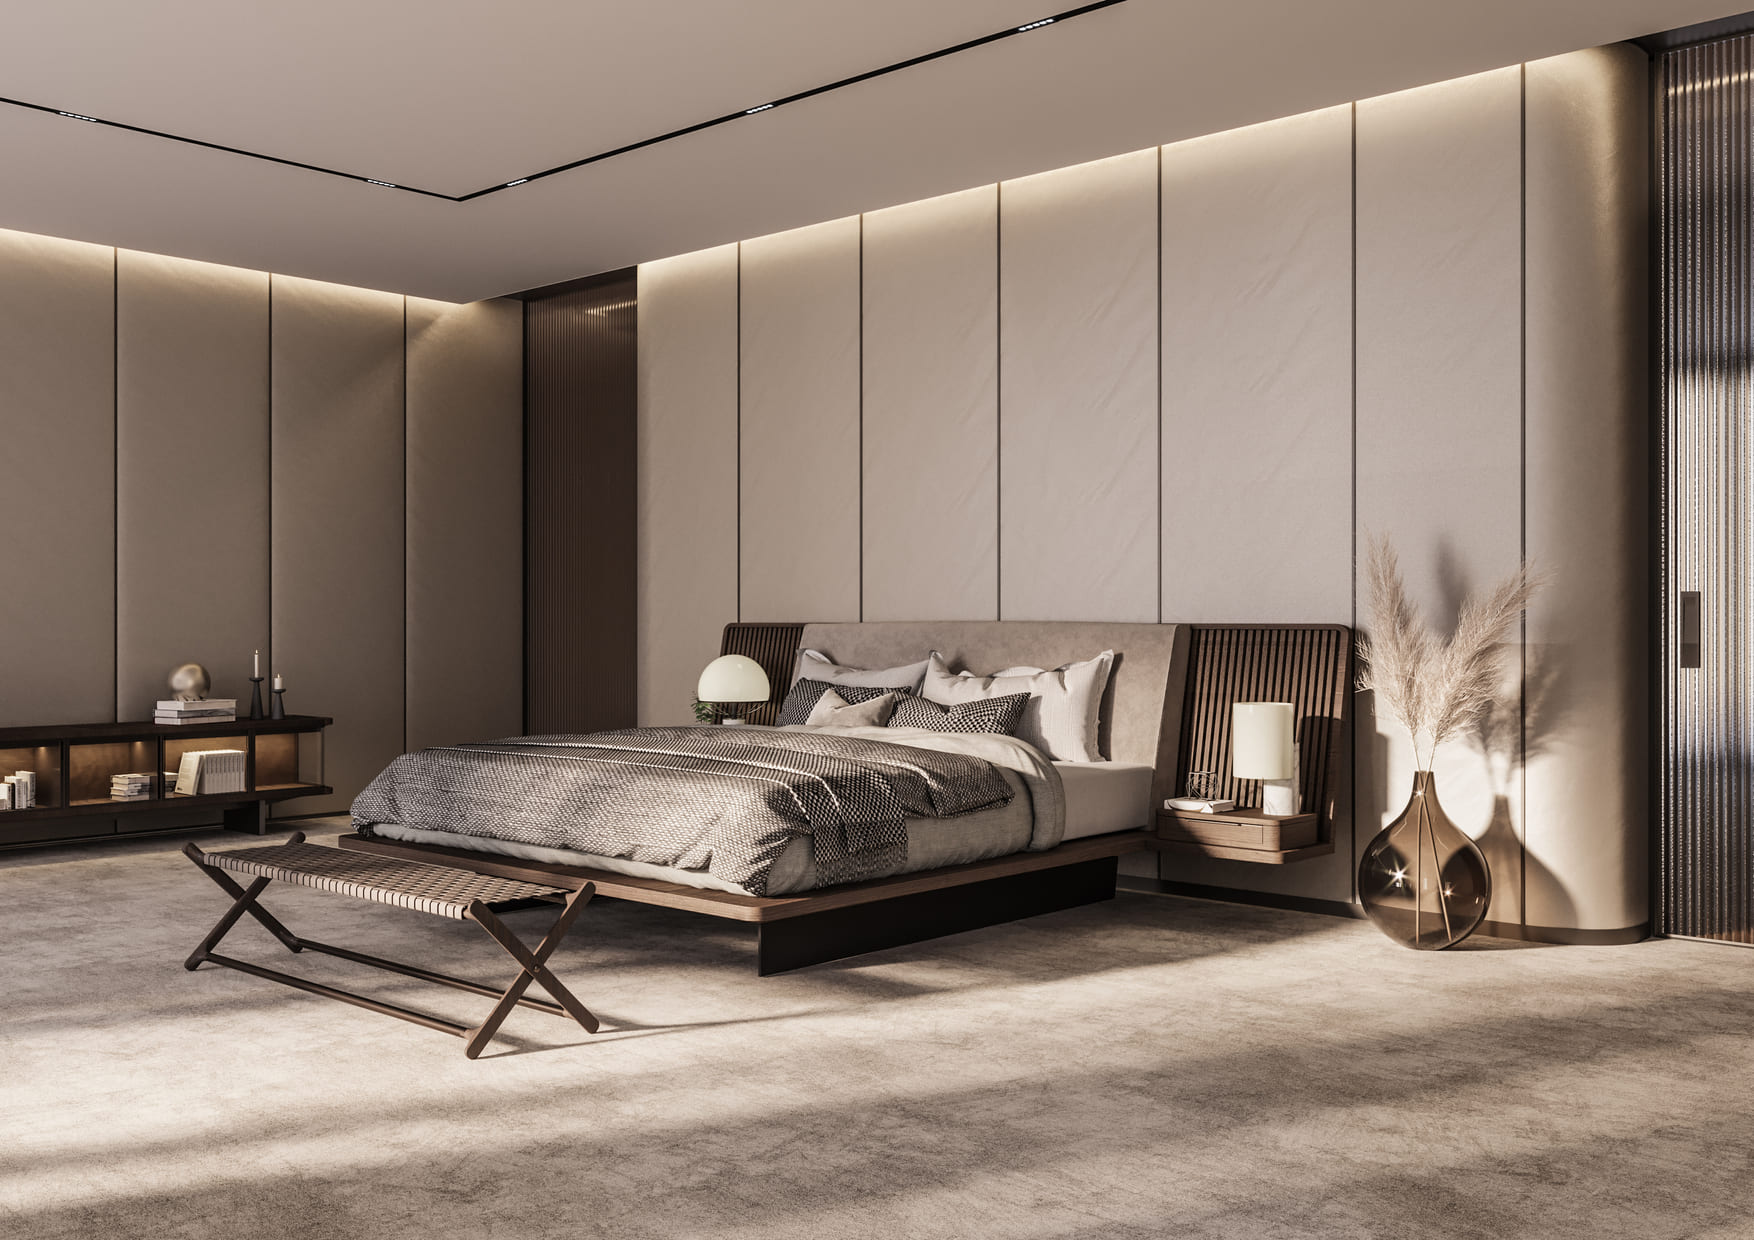 A spacious bedroom with a large bed, soft lighting, minimalist decor, and a lounging chair, all in a soothing neutral palette.